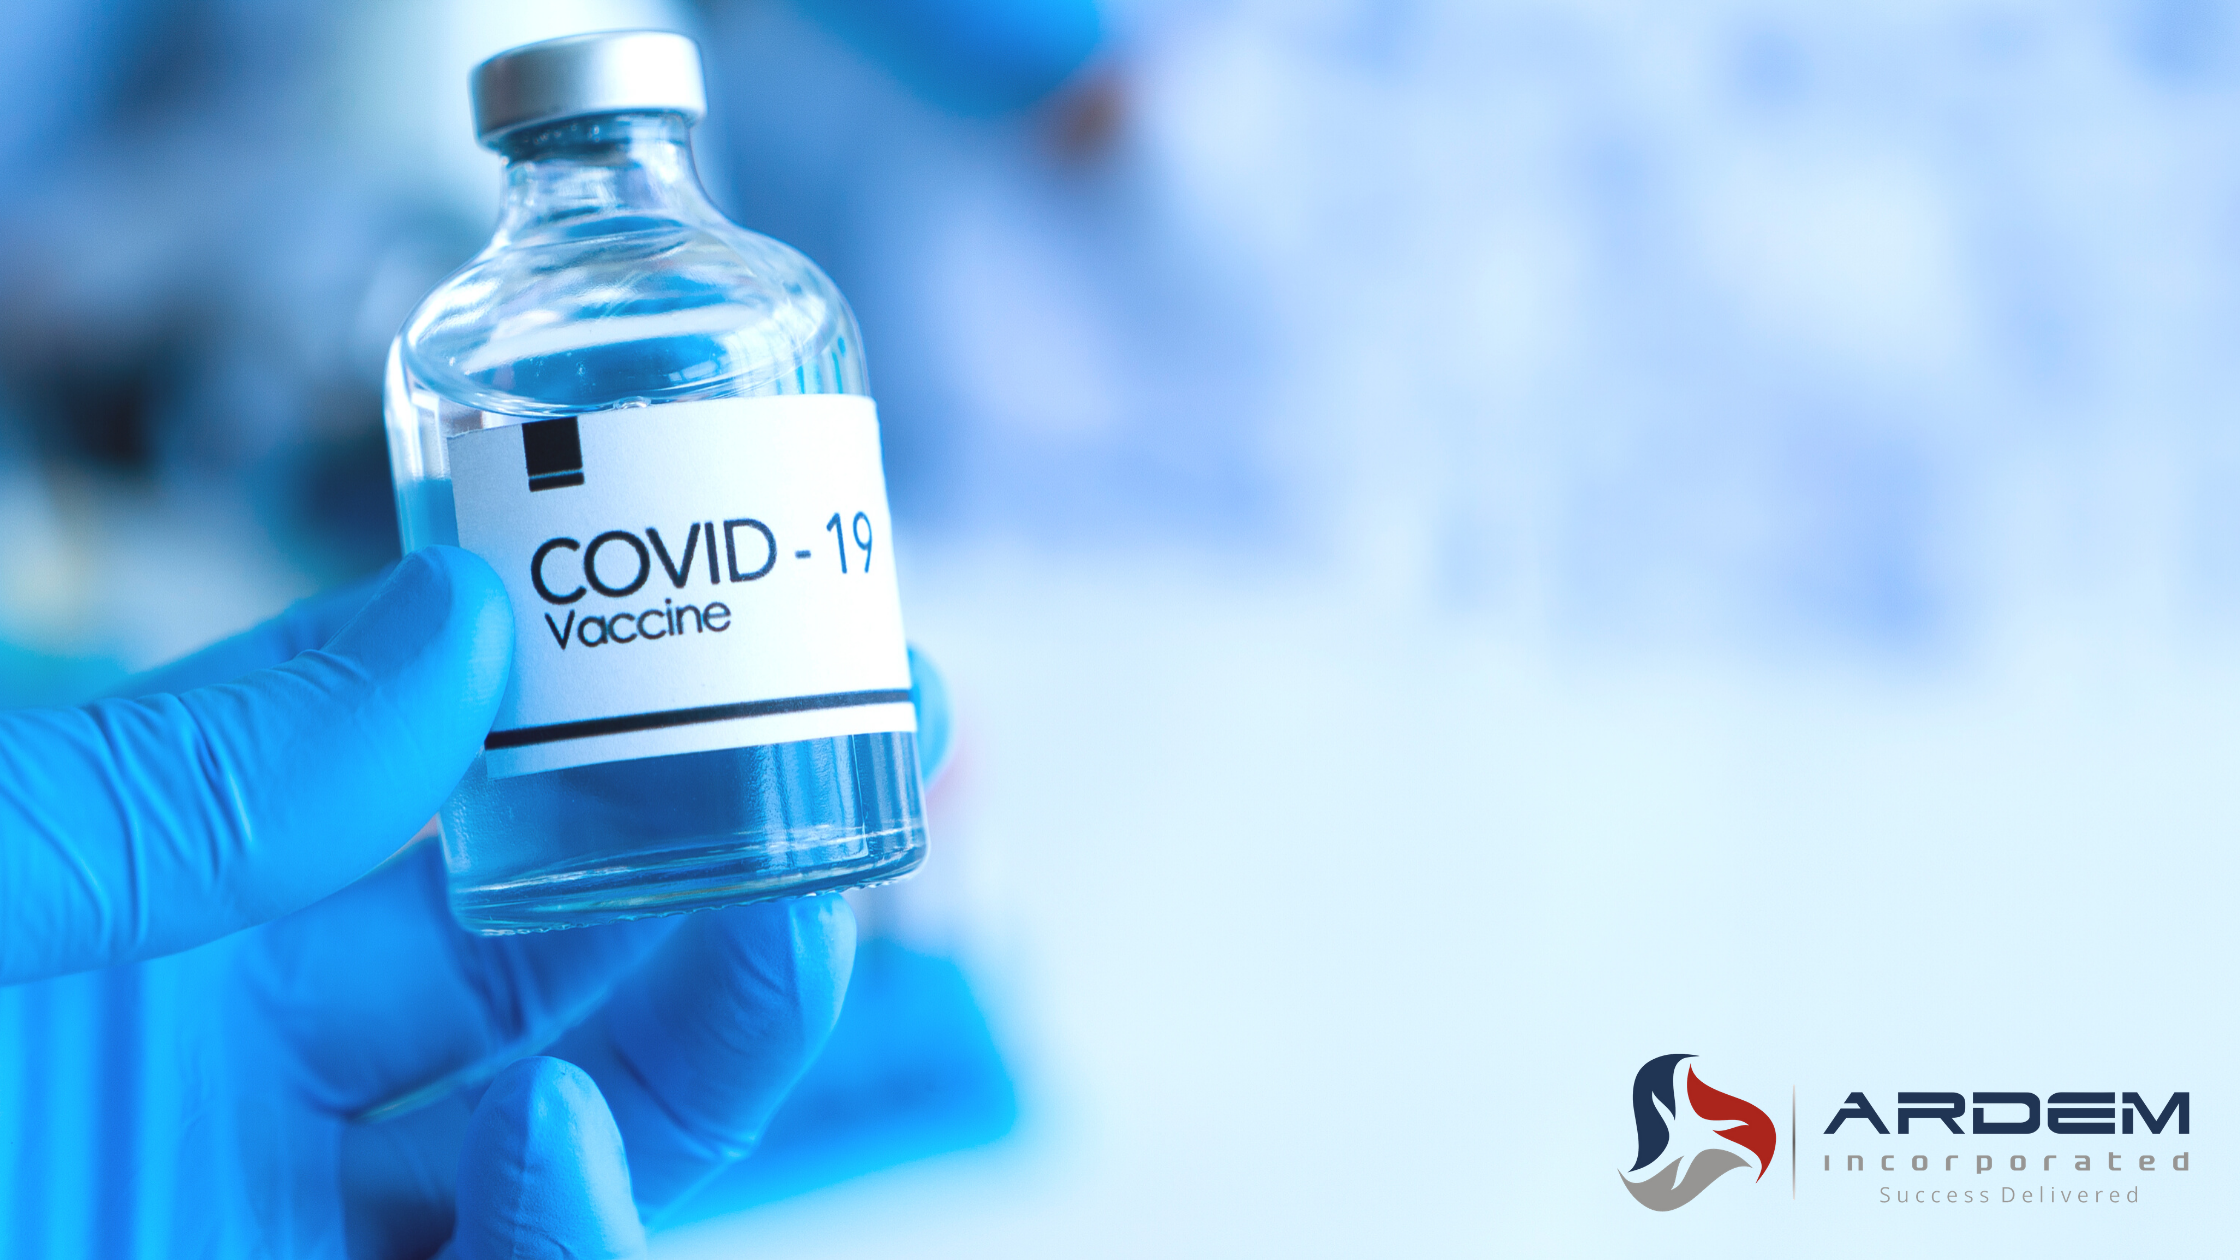 Why You Need Advanced Analytics for COVID-19 Vaccine Tracking